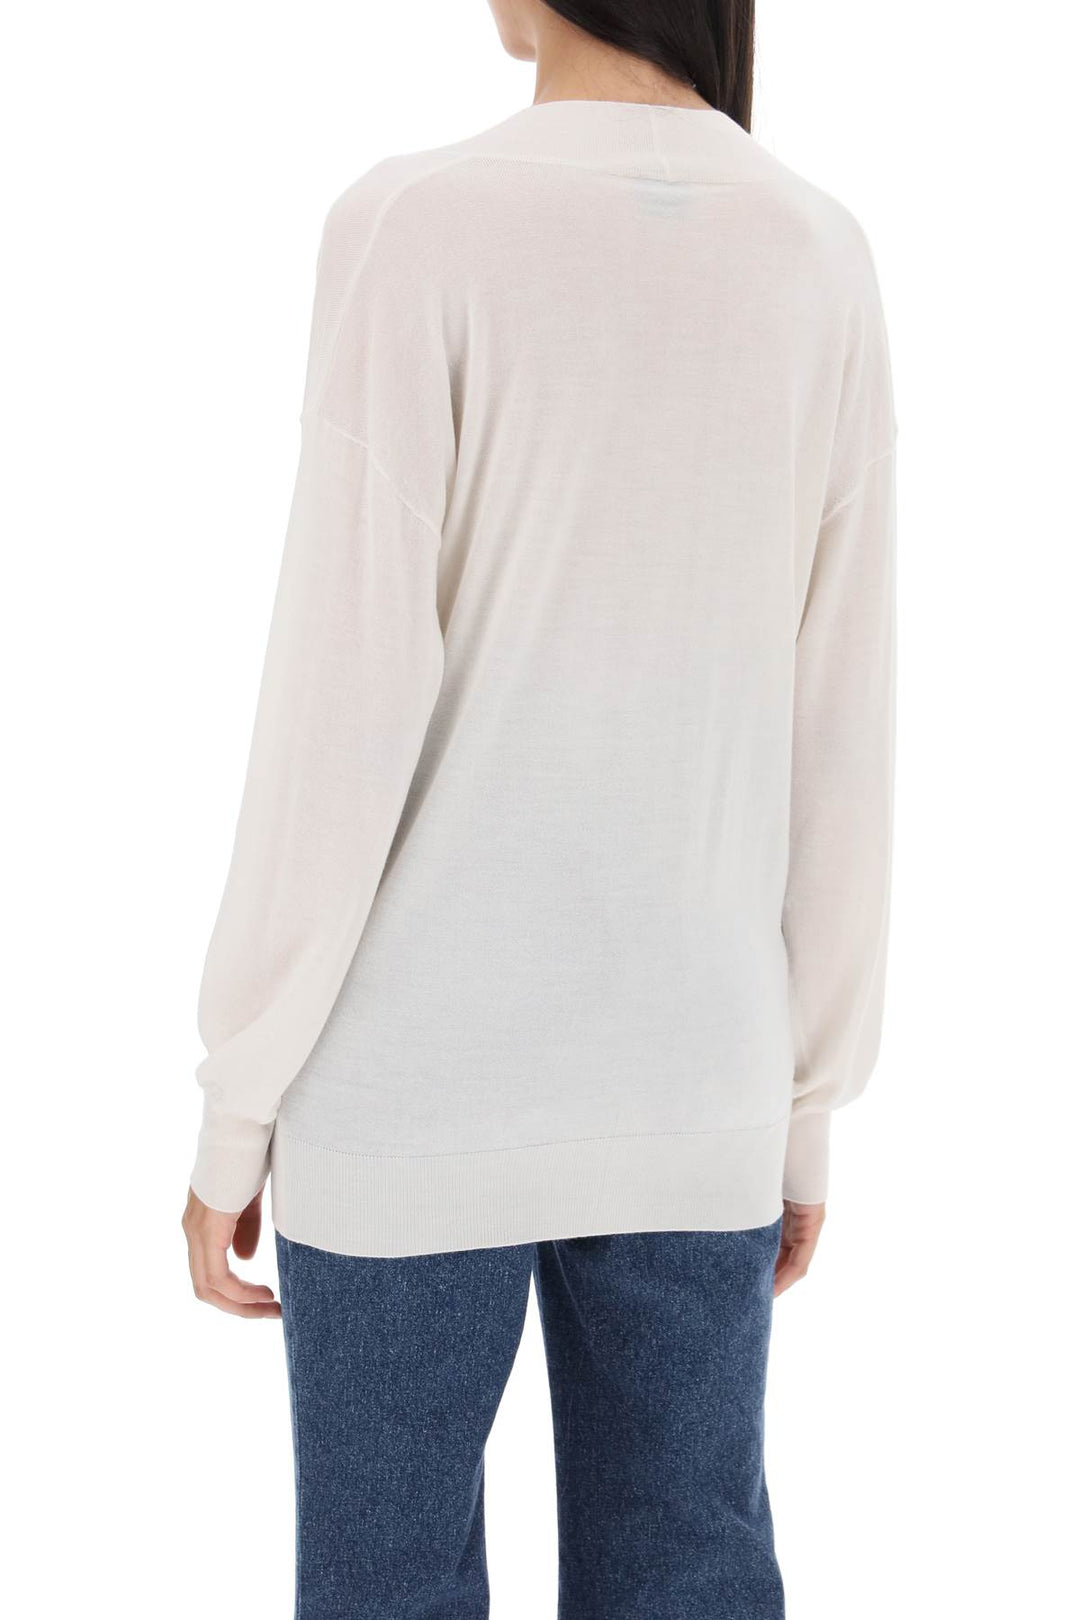 Tom ford sweater in cashmere and silk-2